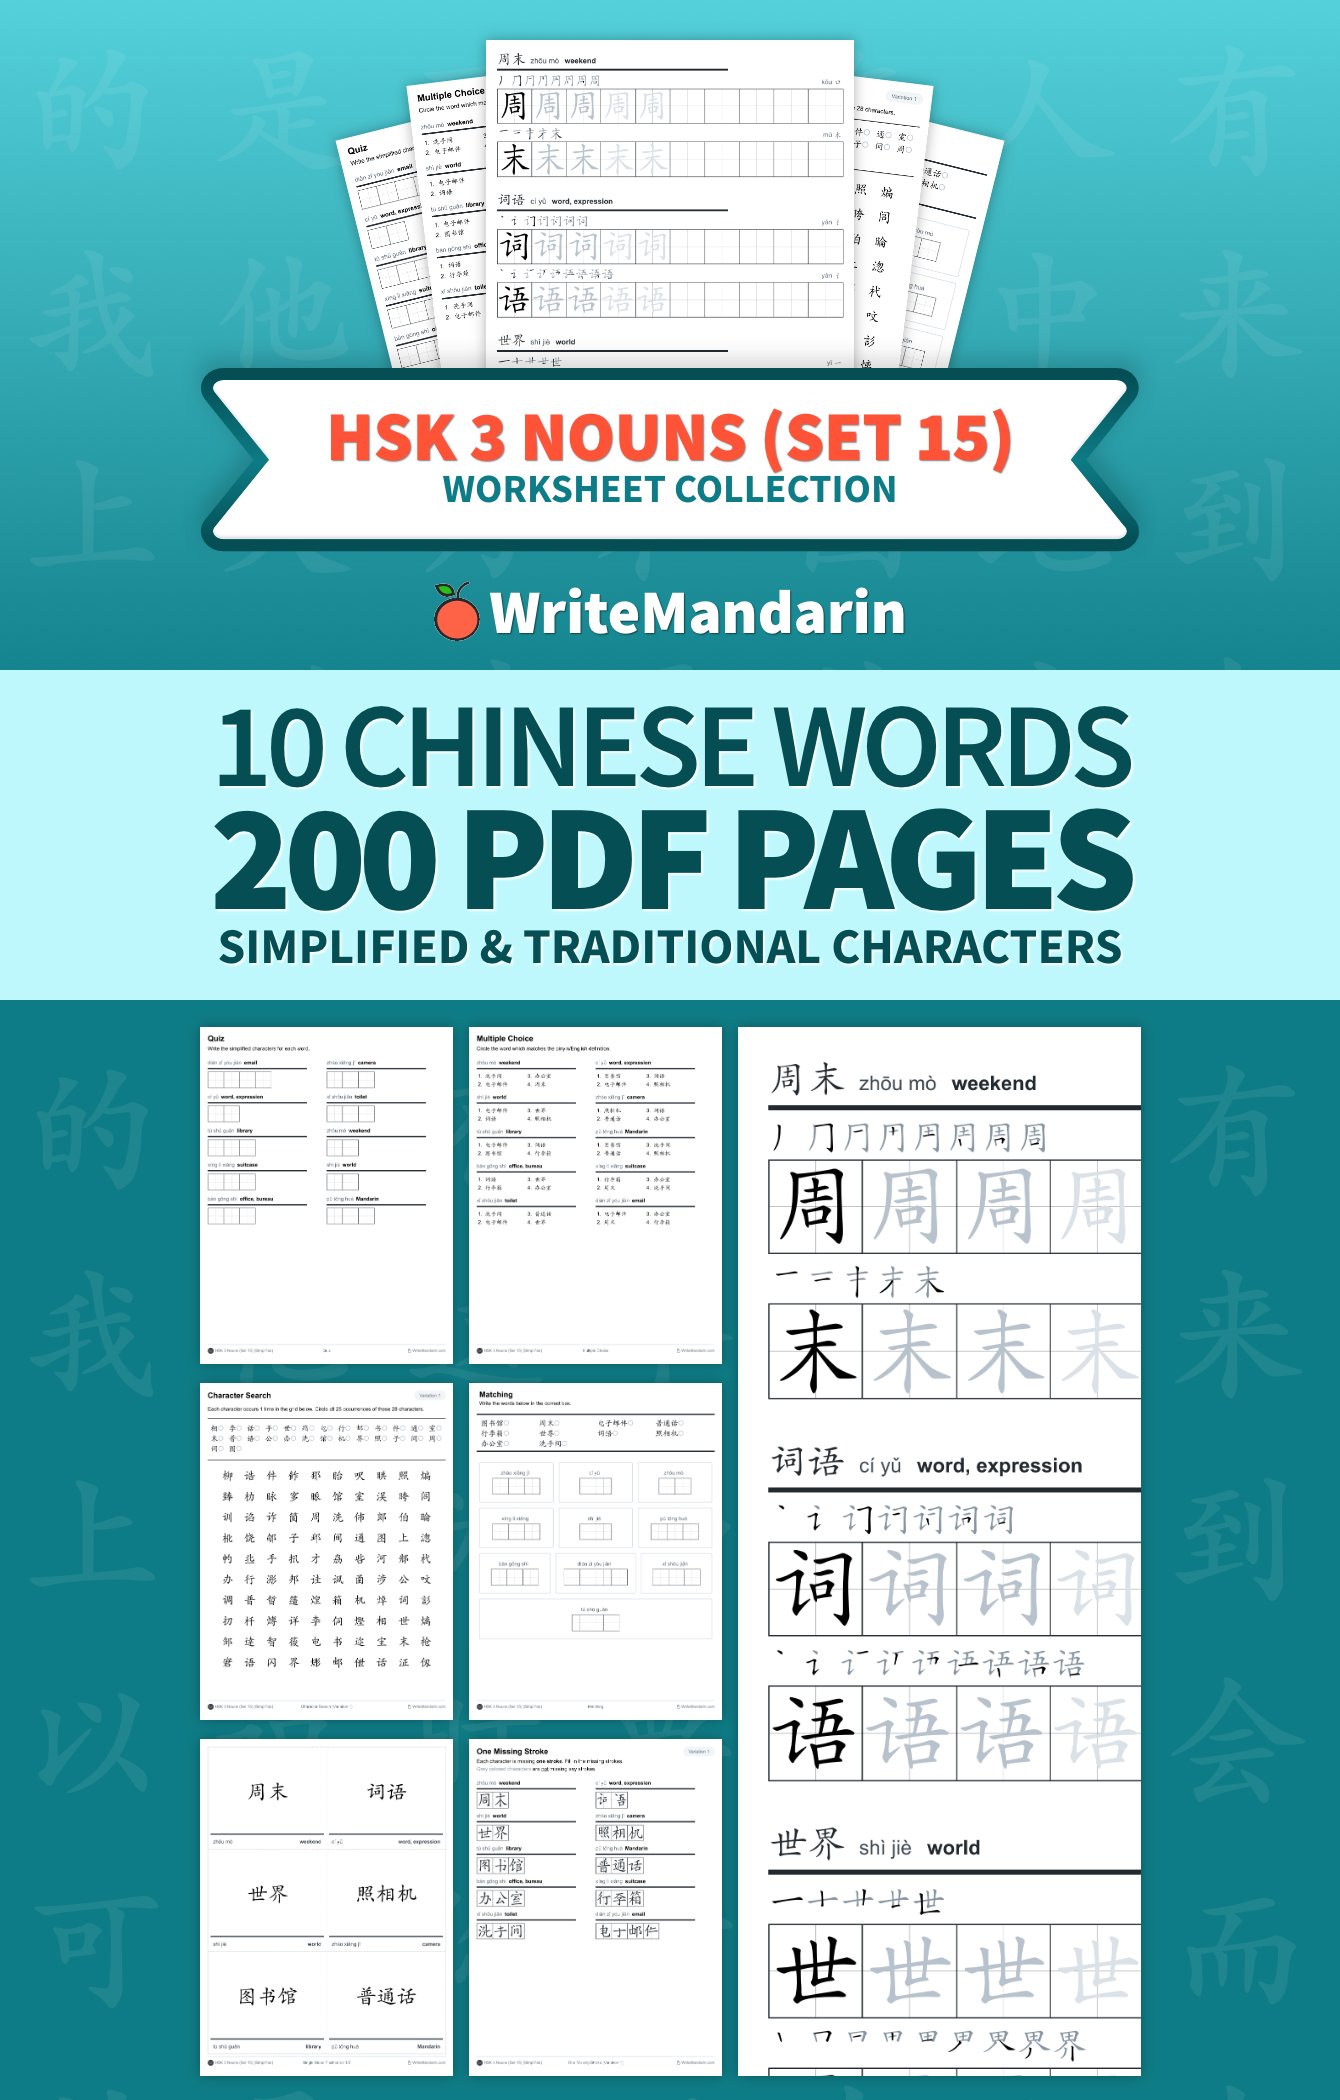 Preview image of HSK 3 Nouns (Set 15) worksheet collection